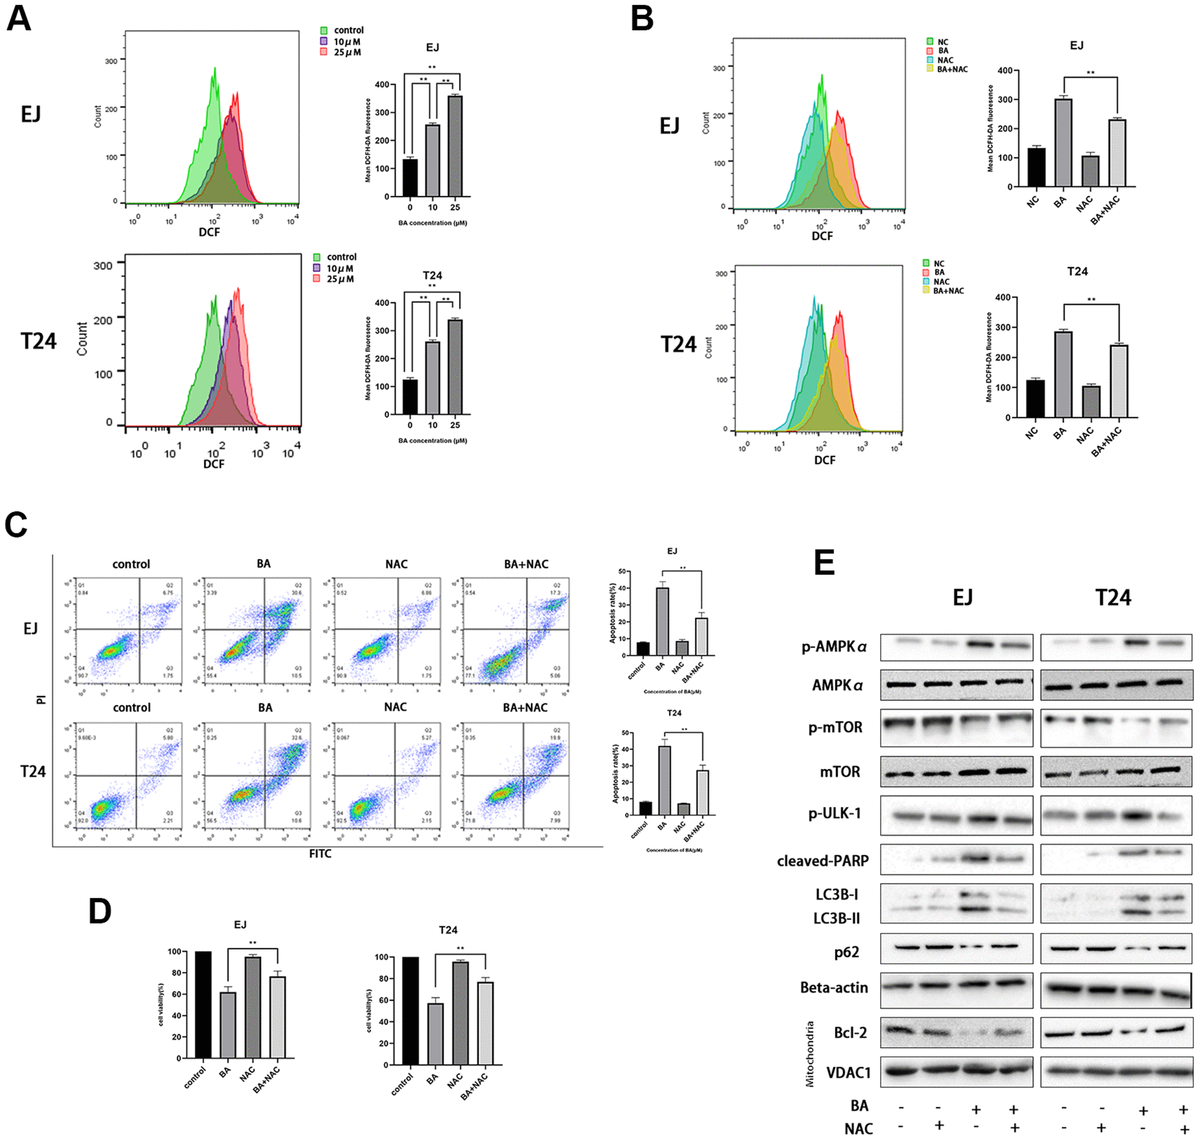 BA-mediated ROS generation induces caspase-dependent apoptosis and autophagy in bladder cancer cells. (A) Flow cytometry analysis of ROS generation in DCFH-DA-loaded EJ and T24 cells exposed to BA at 0, 10, and 25 μM for 24 h. (B) Flow cytometry analysis of ROS generation in EJ and T24 cells pre-exposed to NAC. (C) Flow cytometry analysis of apoptosis. (D) The CCK-8 assay was employed to evaluate NAC effect on BA-triggered cytotoxicity. (E) Western blot analysis of p-AMPKα (Thr172), cleaved PARP, p-mTOR (Ser2448), p-ULK1 (Ser555), Bcl-2, p62, and LC3B II levels. *pp